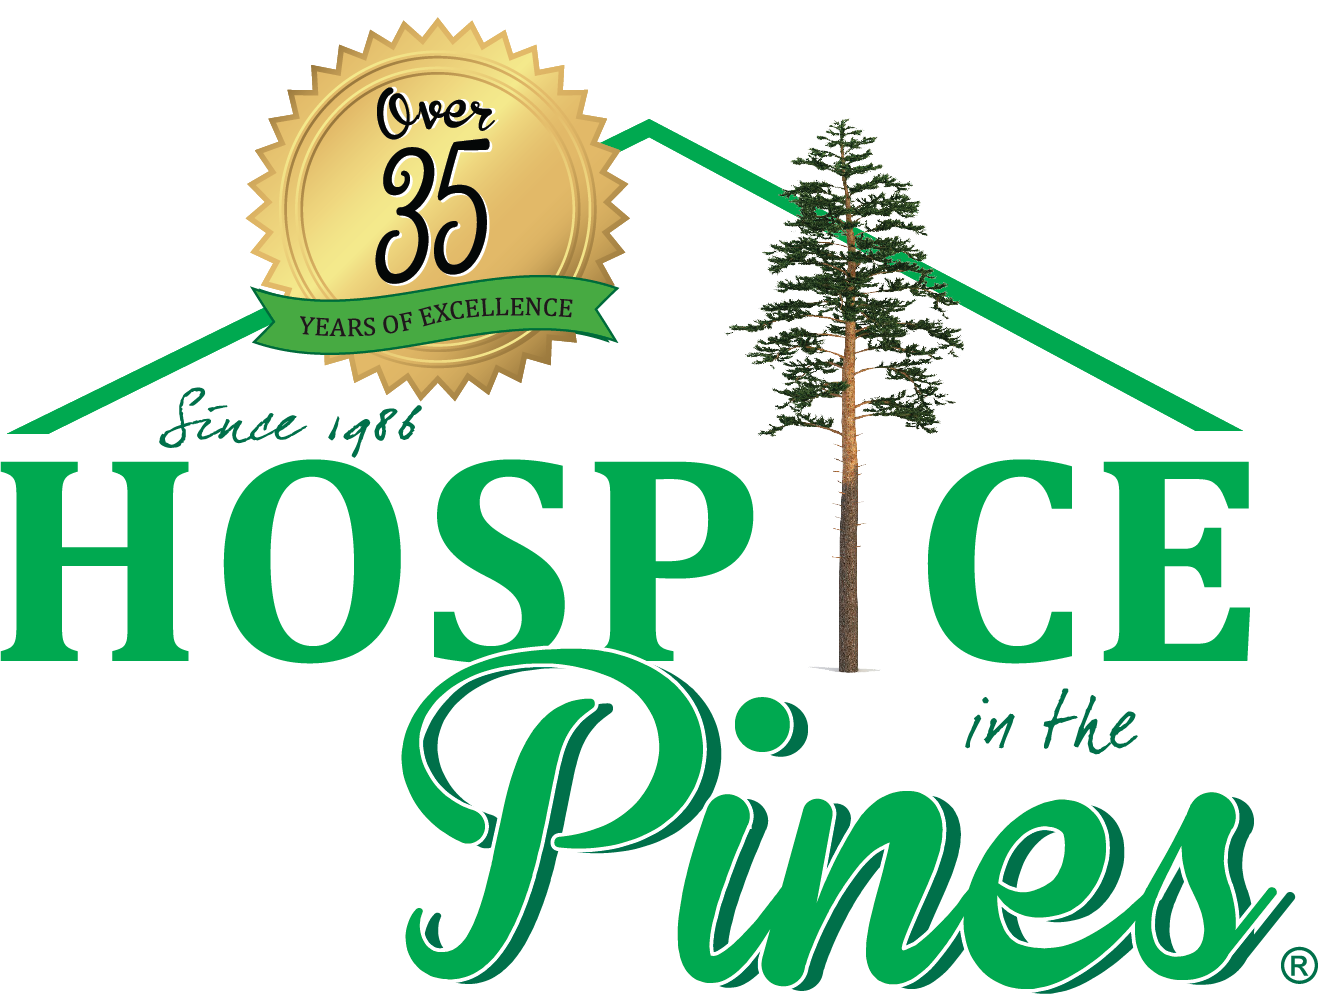 Hospice in the Pines, Inc.